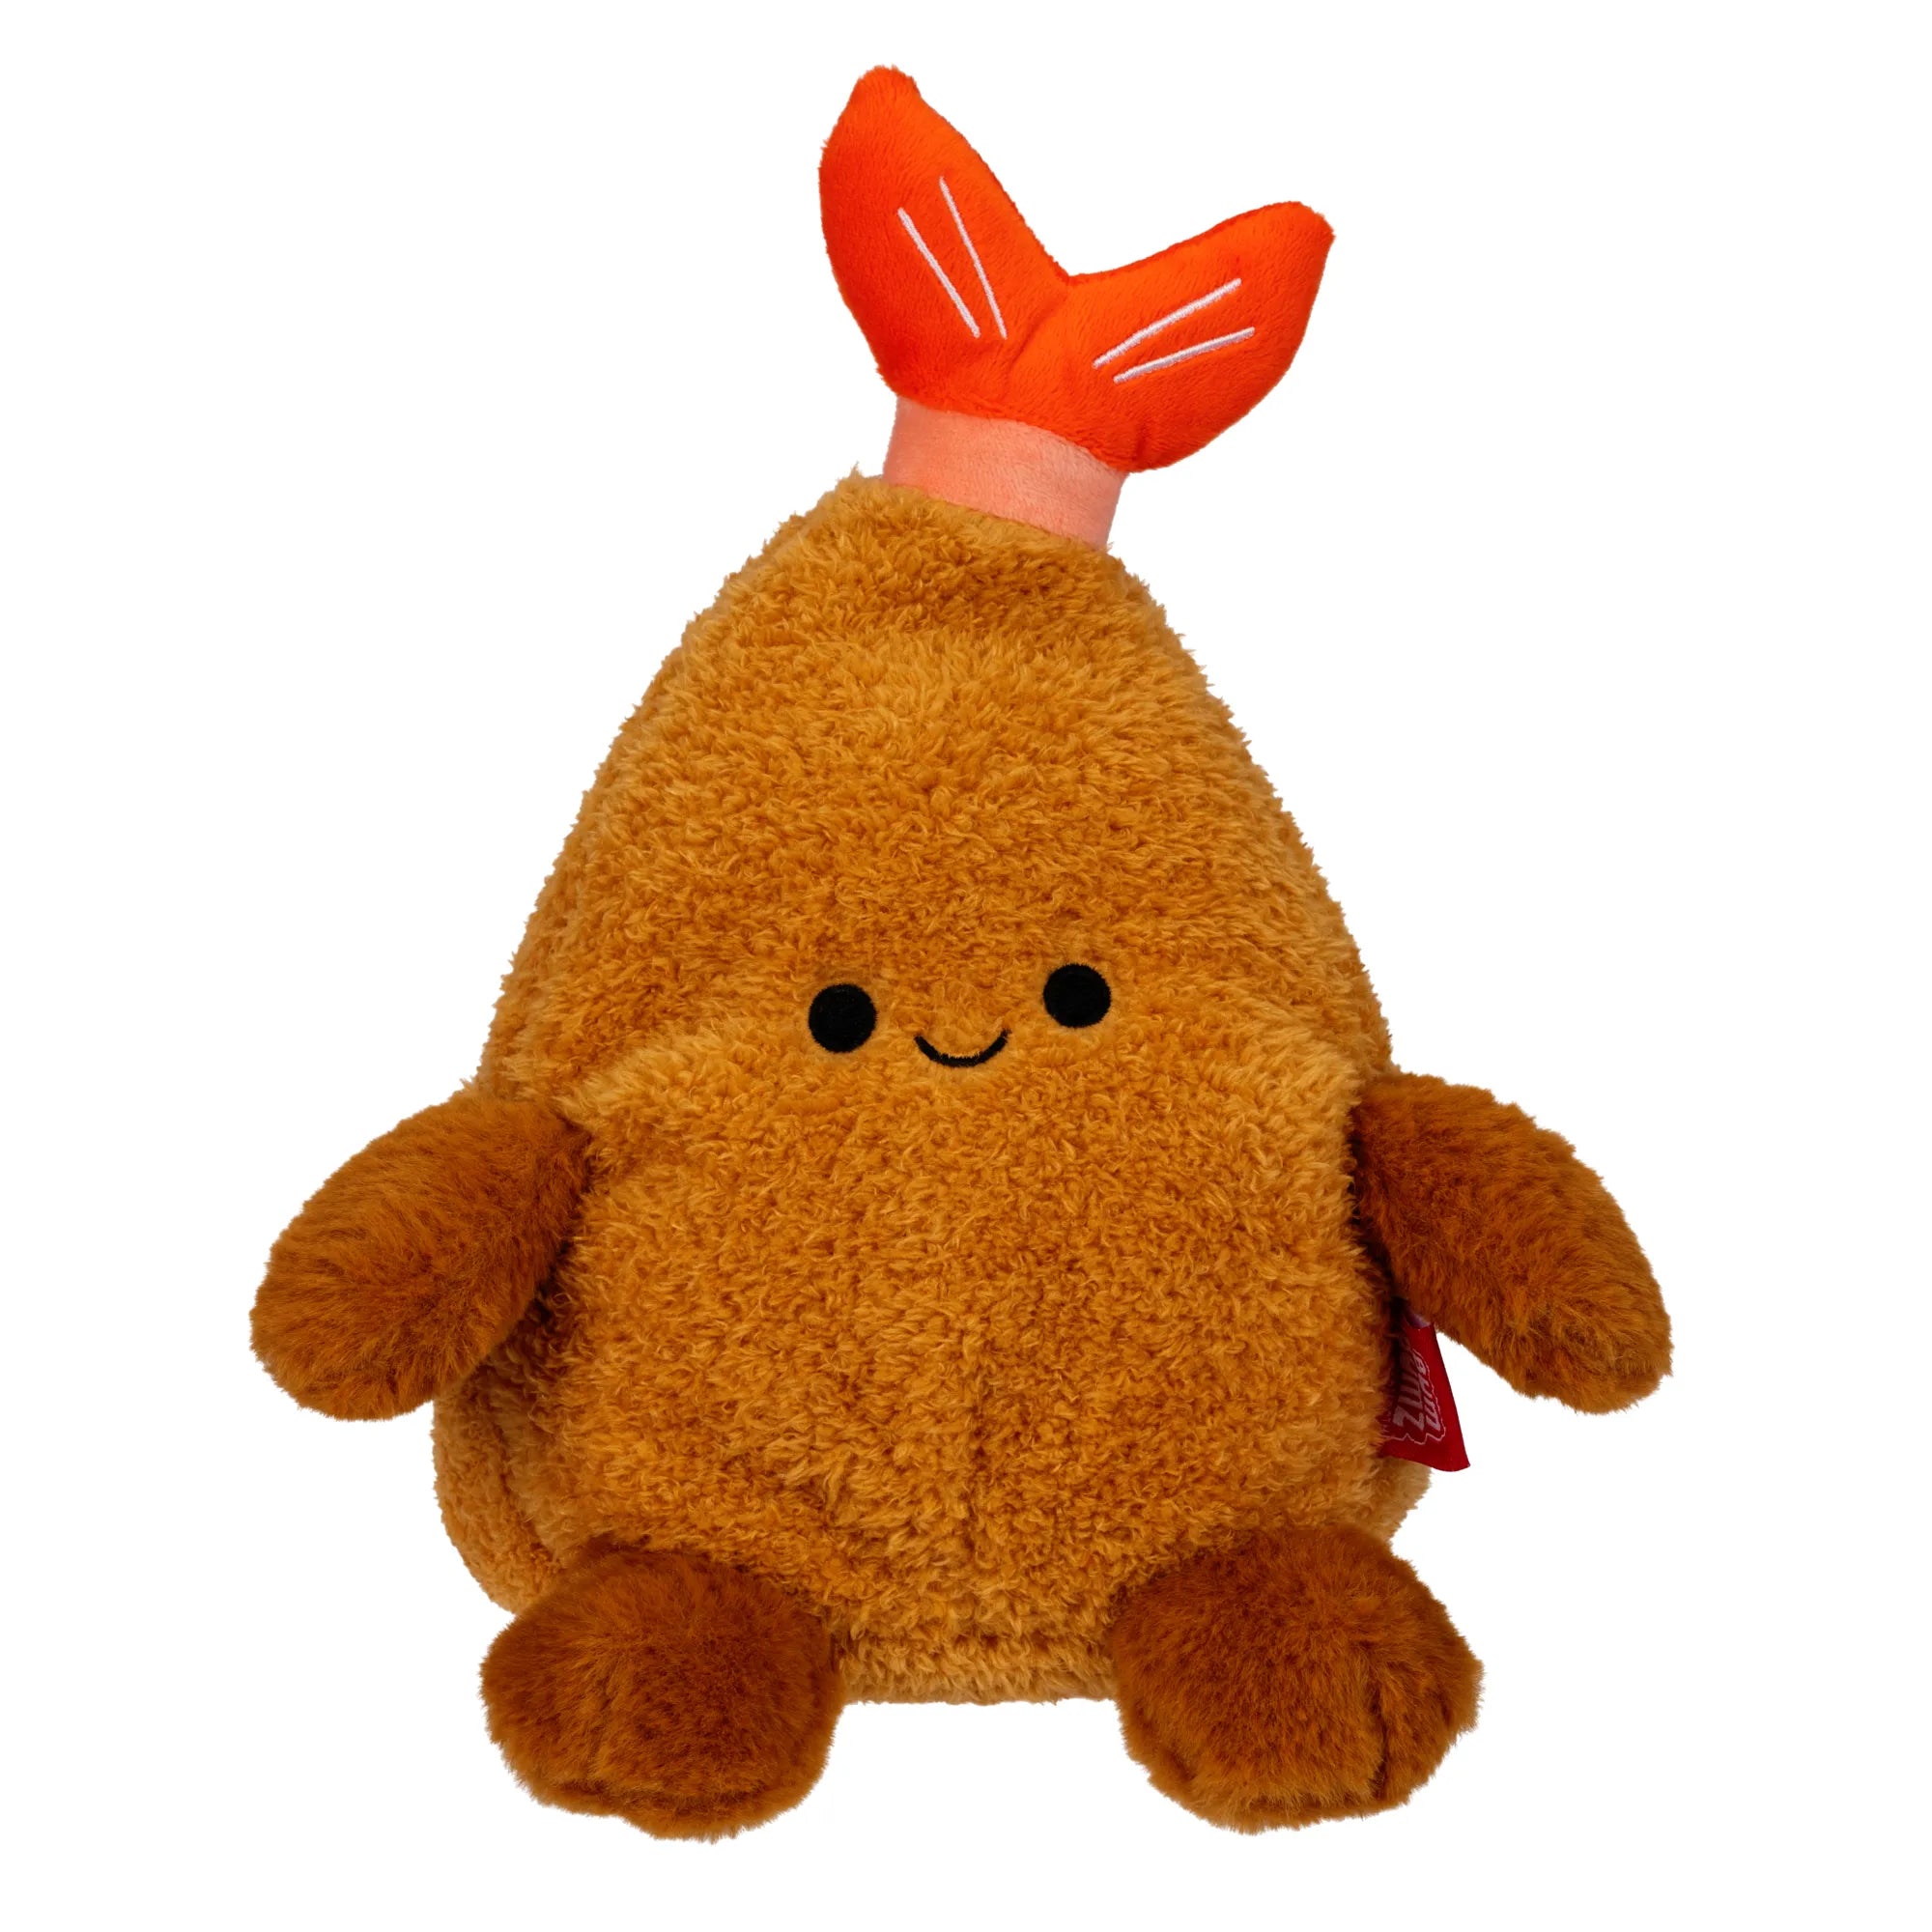 BumBumz Takeout Series - 7.5” Collectibles - Tempura 'Timothy' - Ages 3-Adult - Brown's Hobby & Game